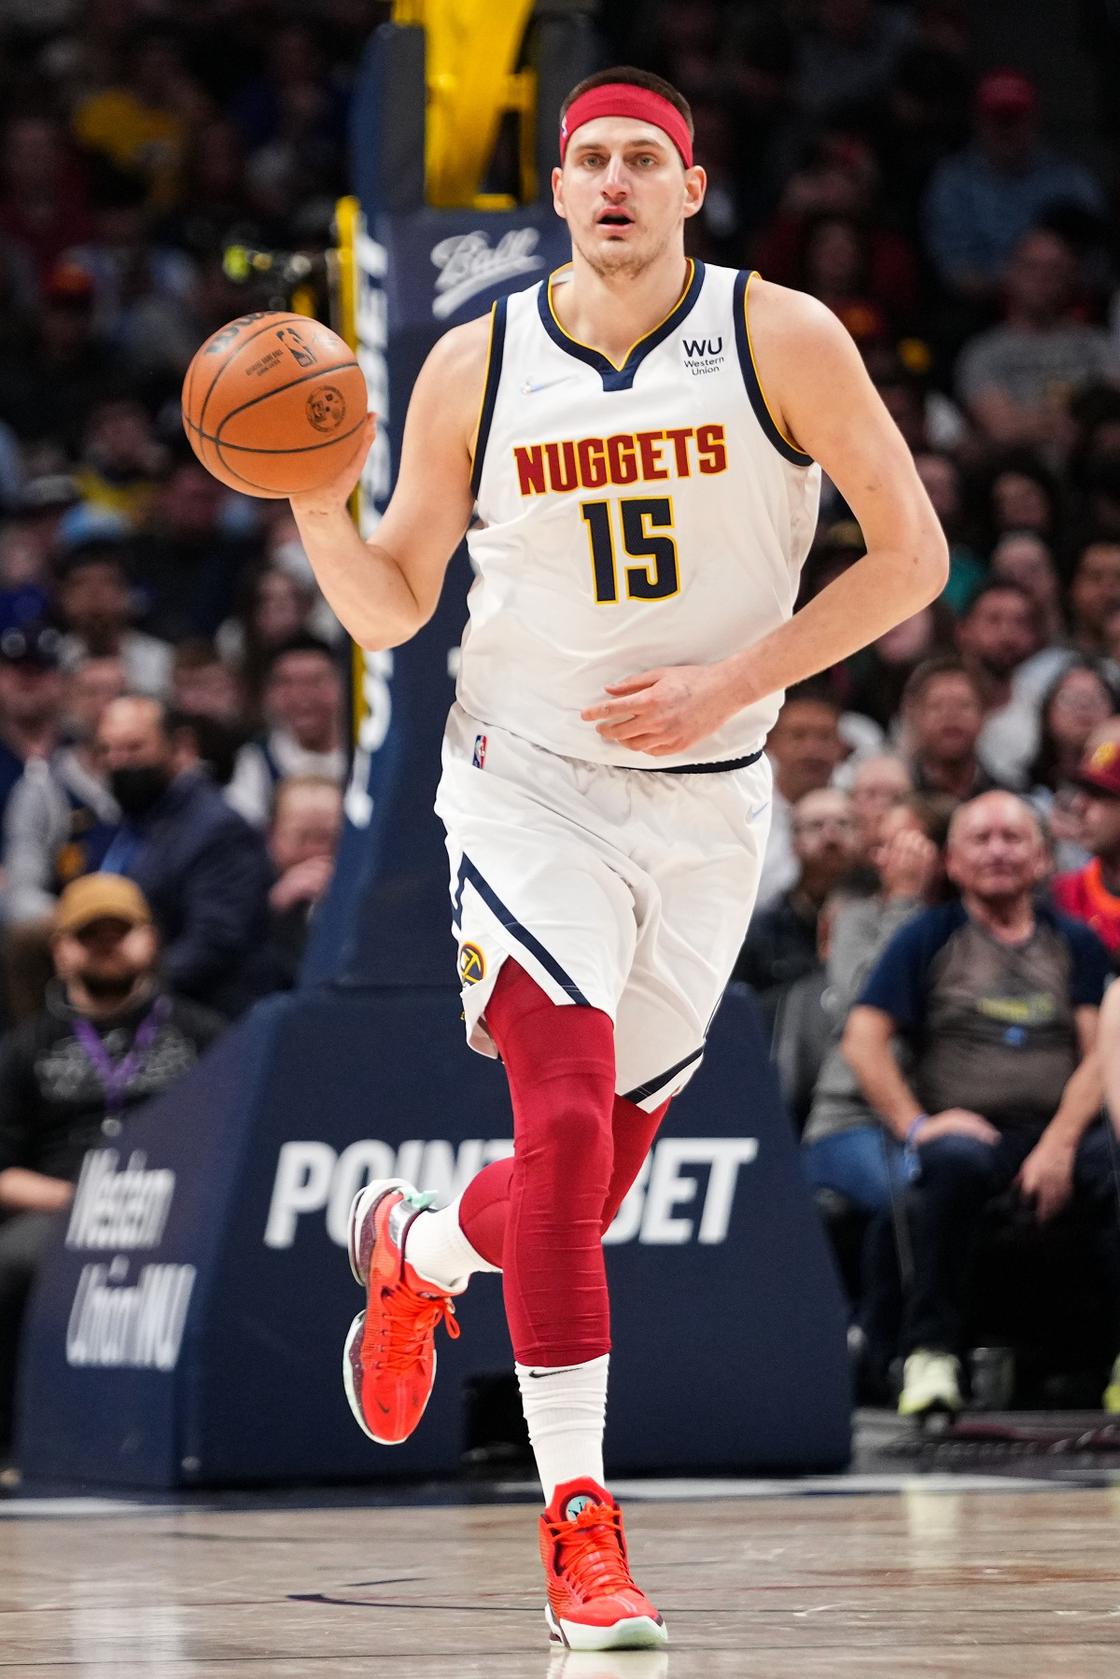 Jokic Height Without Shoes